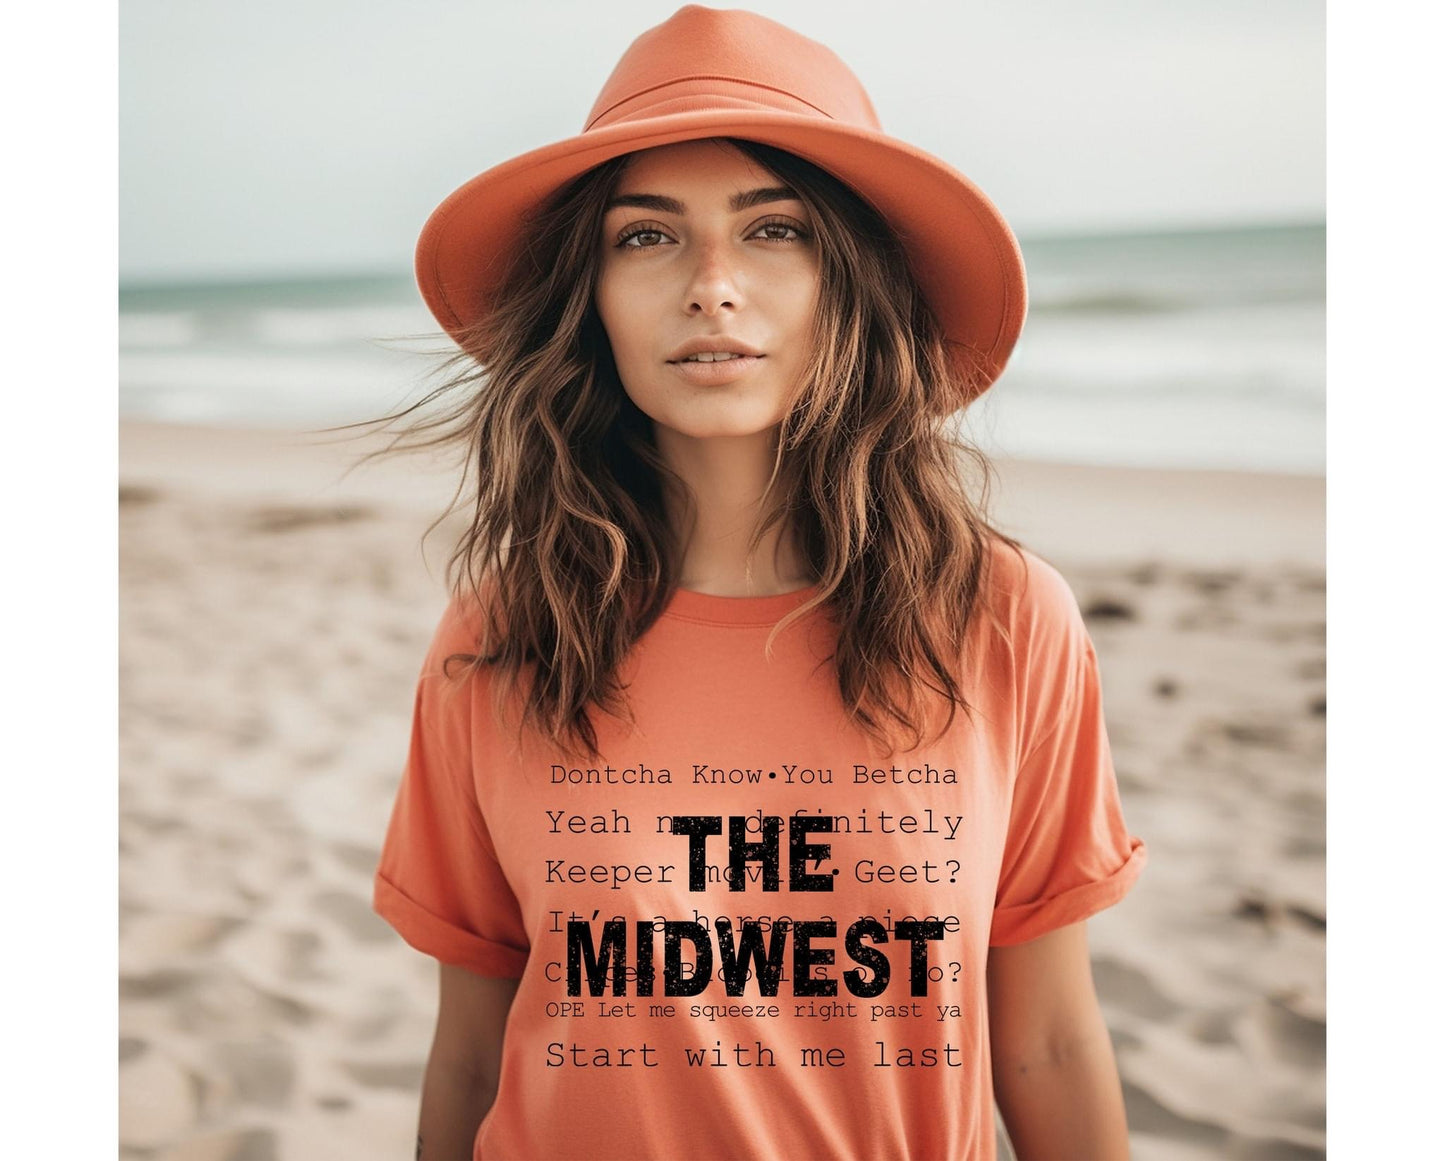 The Midwest Graphic Tee